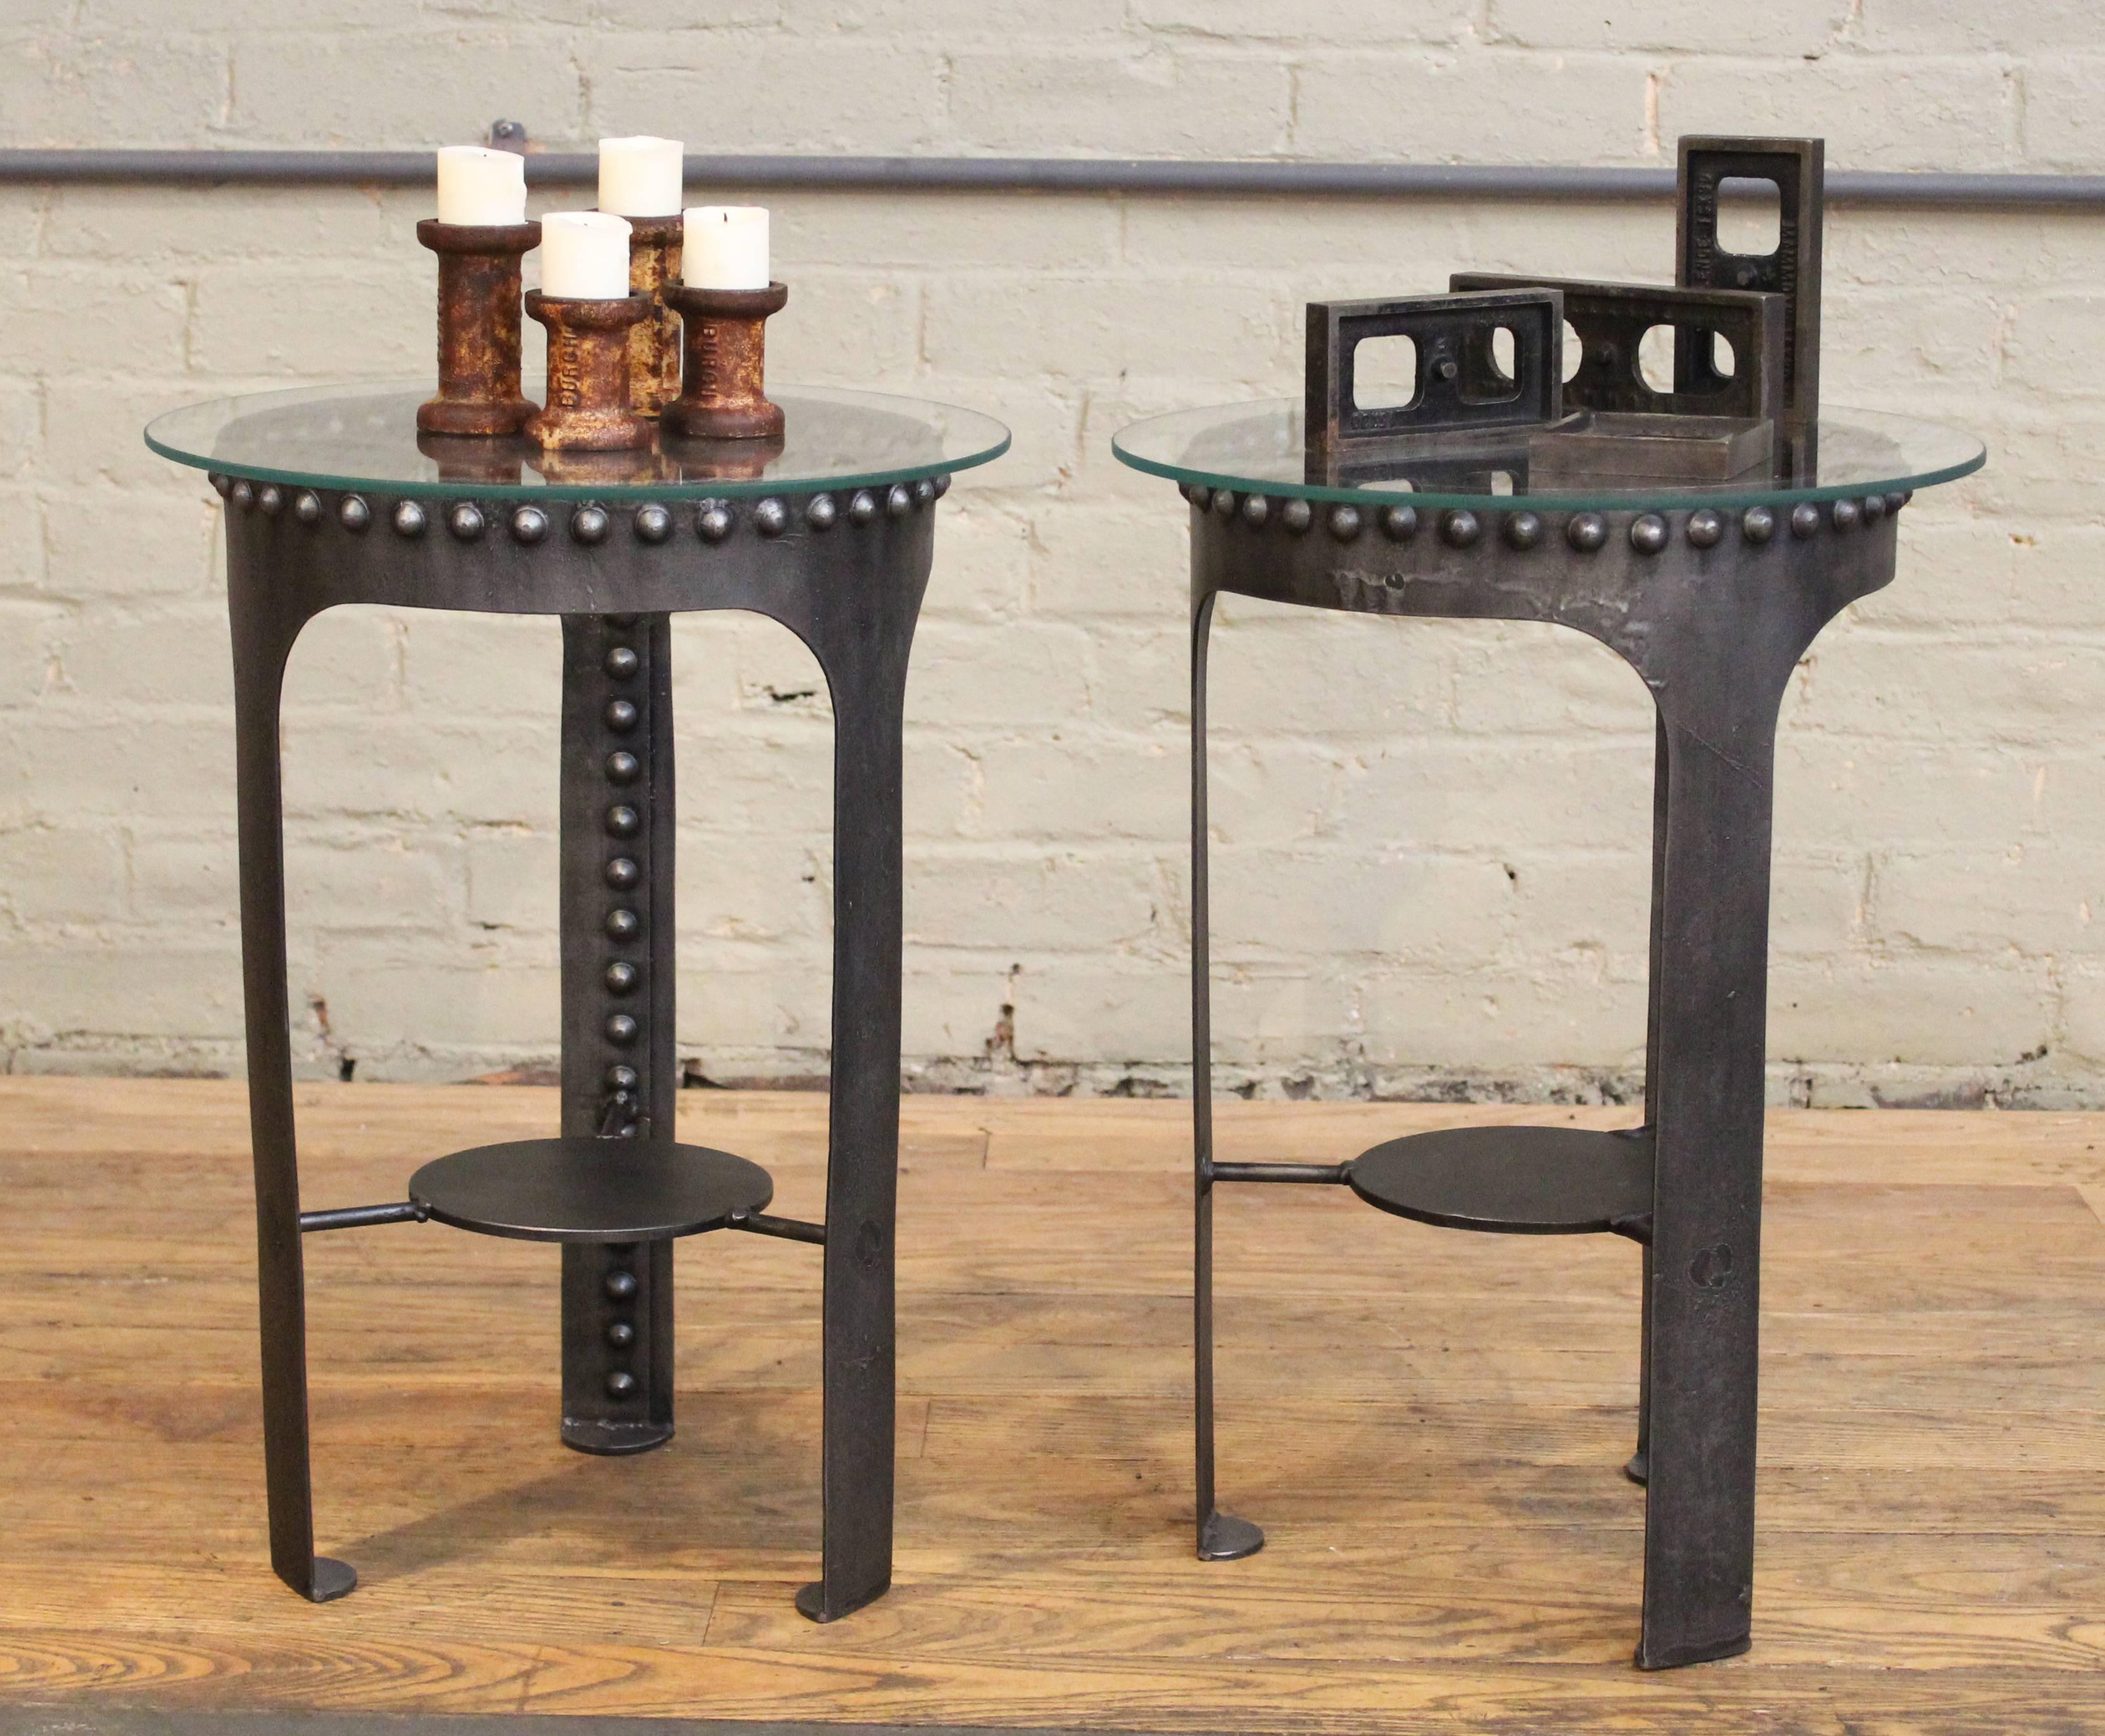 Vintage industrial tank end, side tables. Built from authentic antique riveted steel water tanks. 13